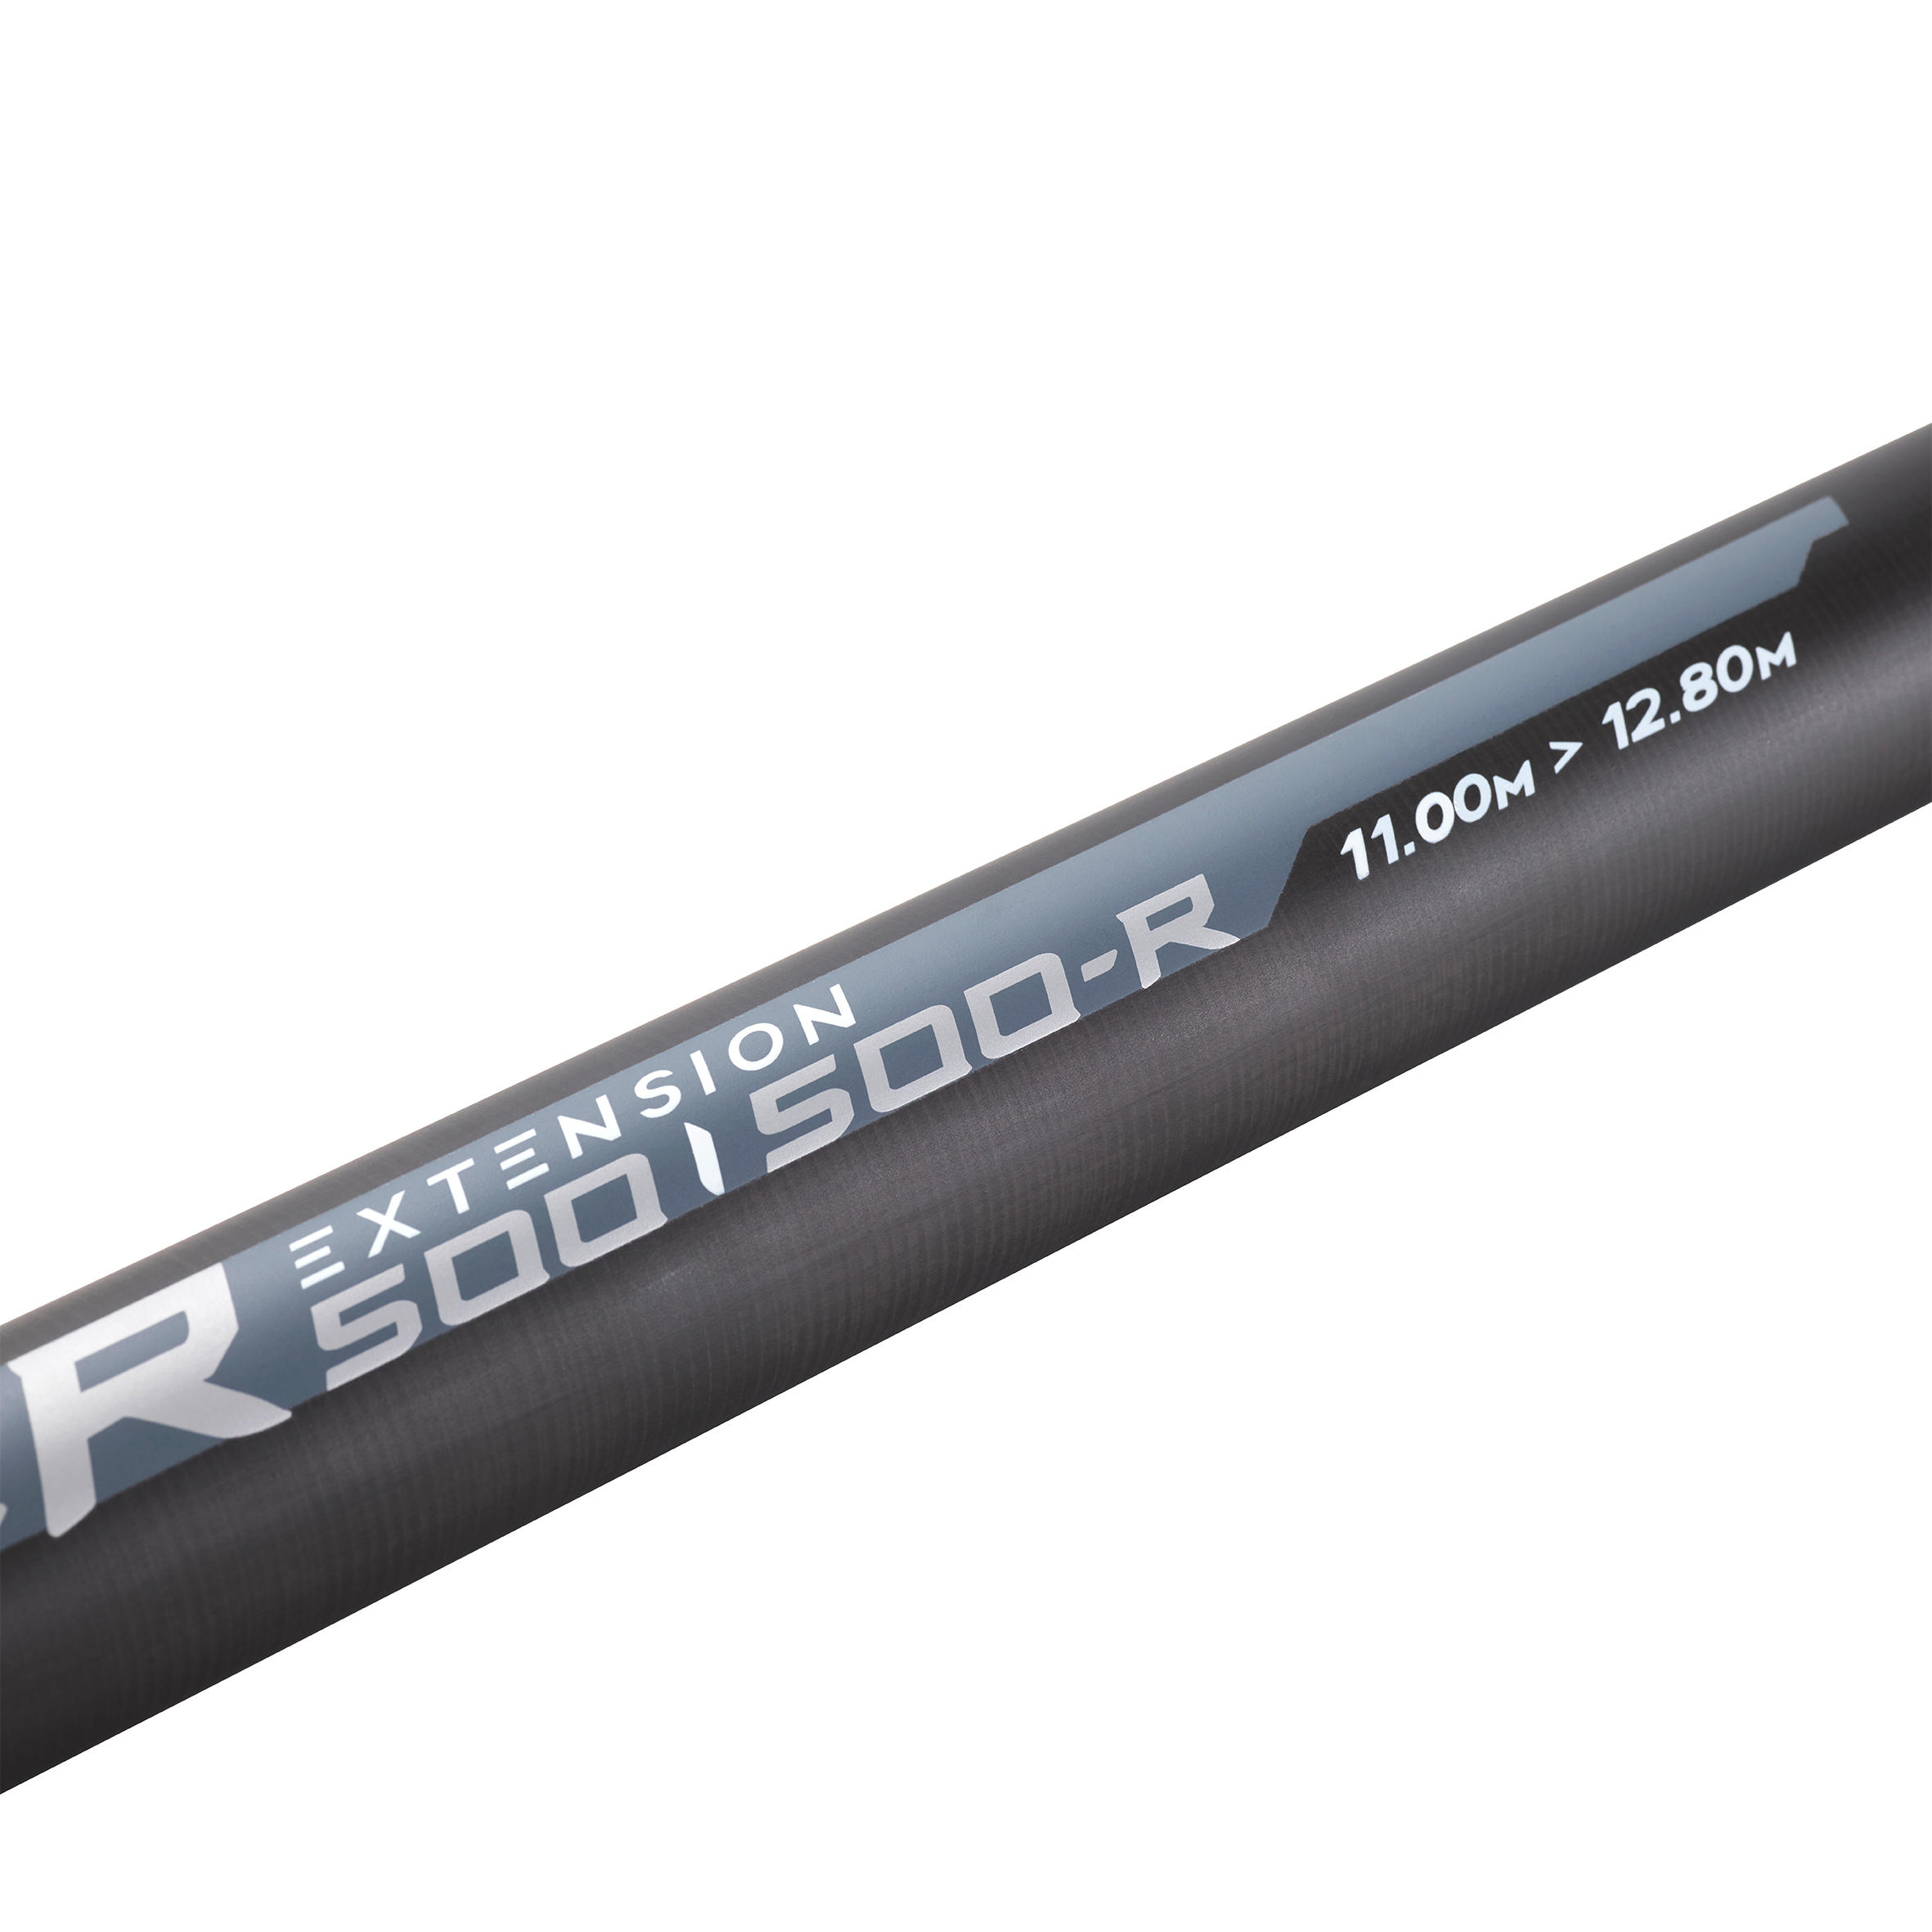 EXTENSION 1.8M  FOR RODS CARPOVER-500 AND 500R 4/7